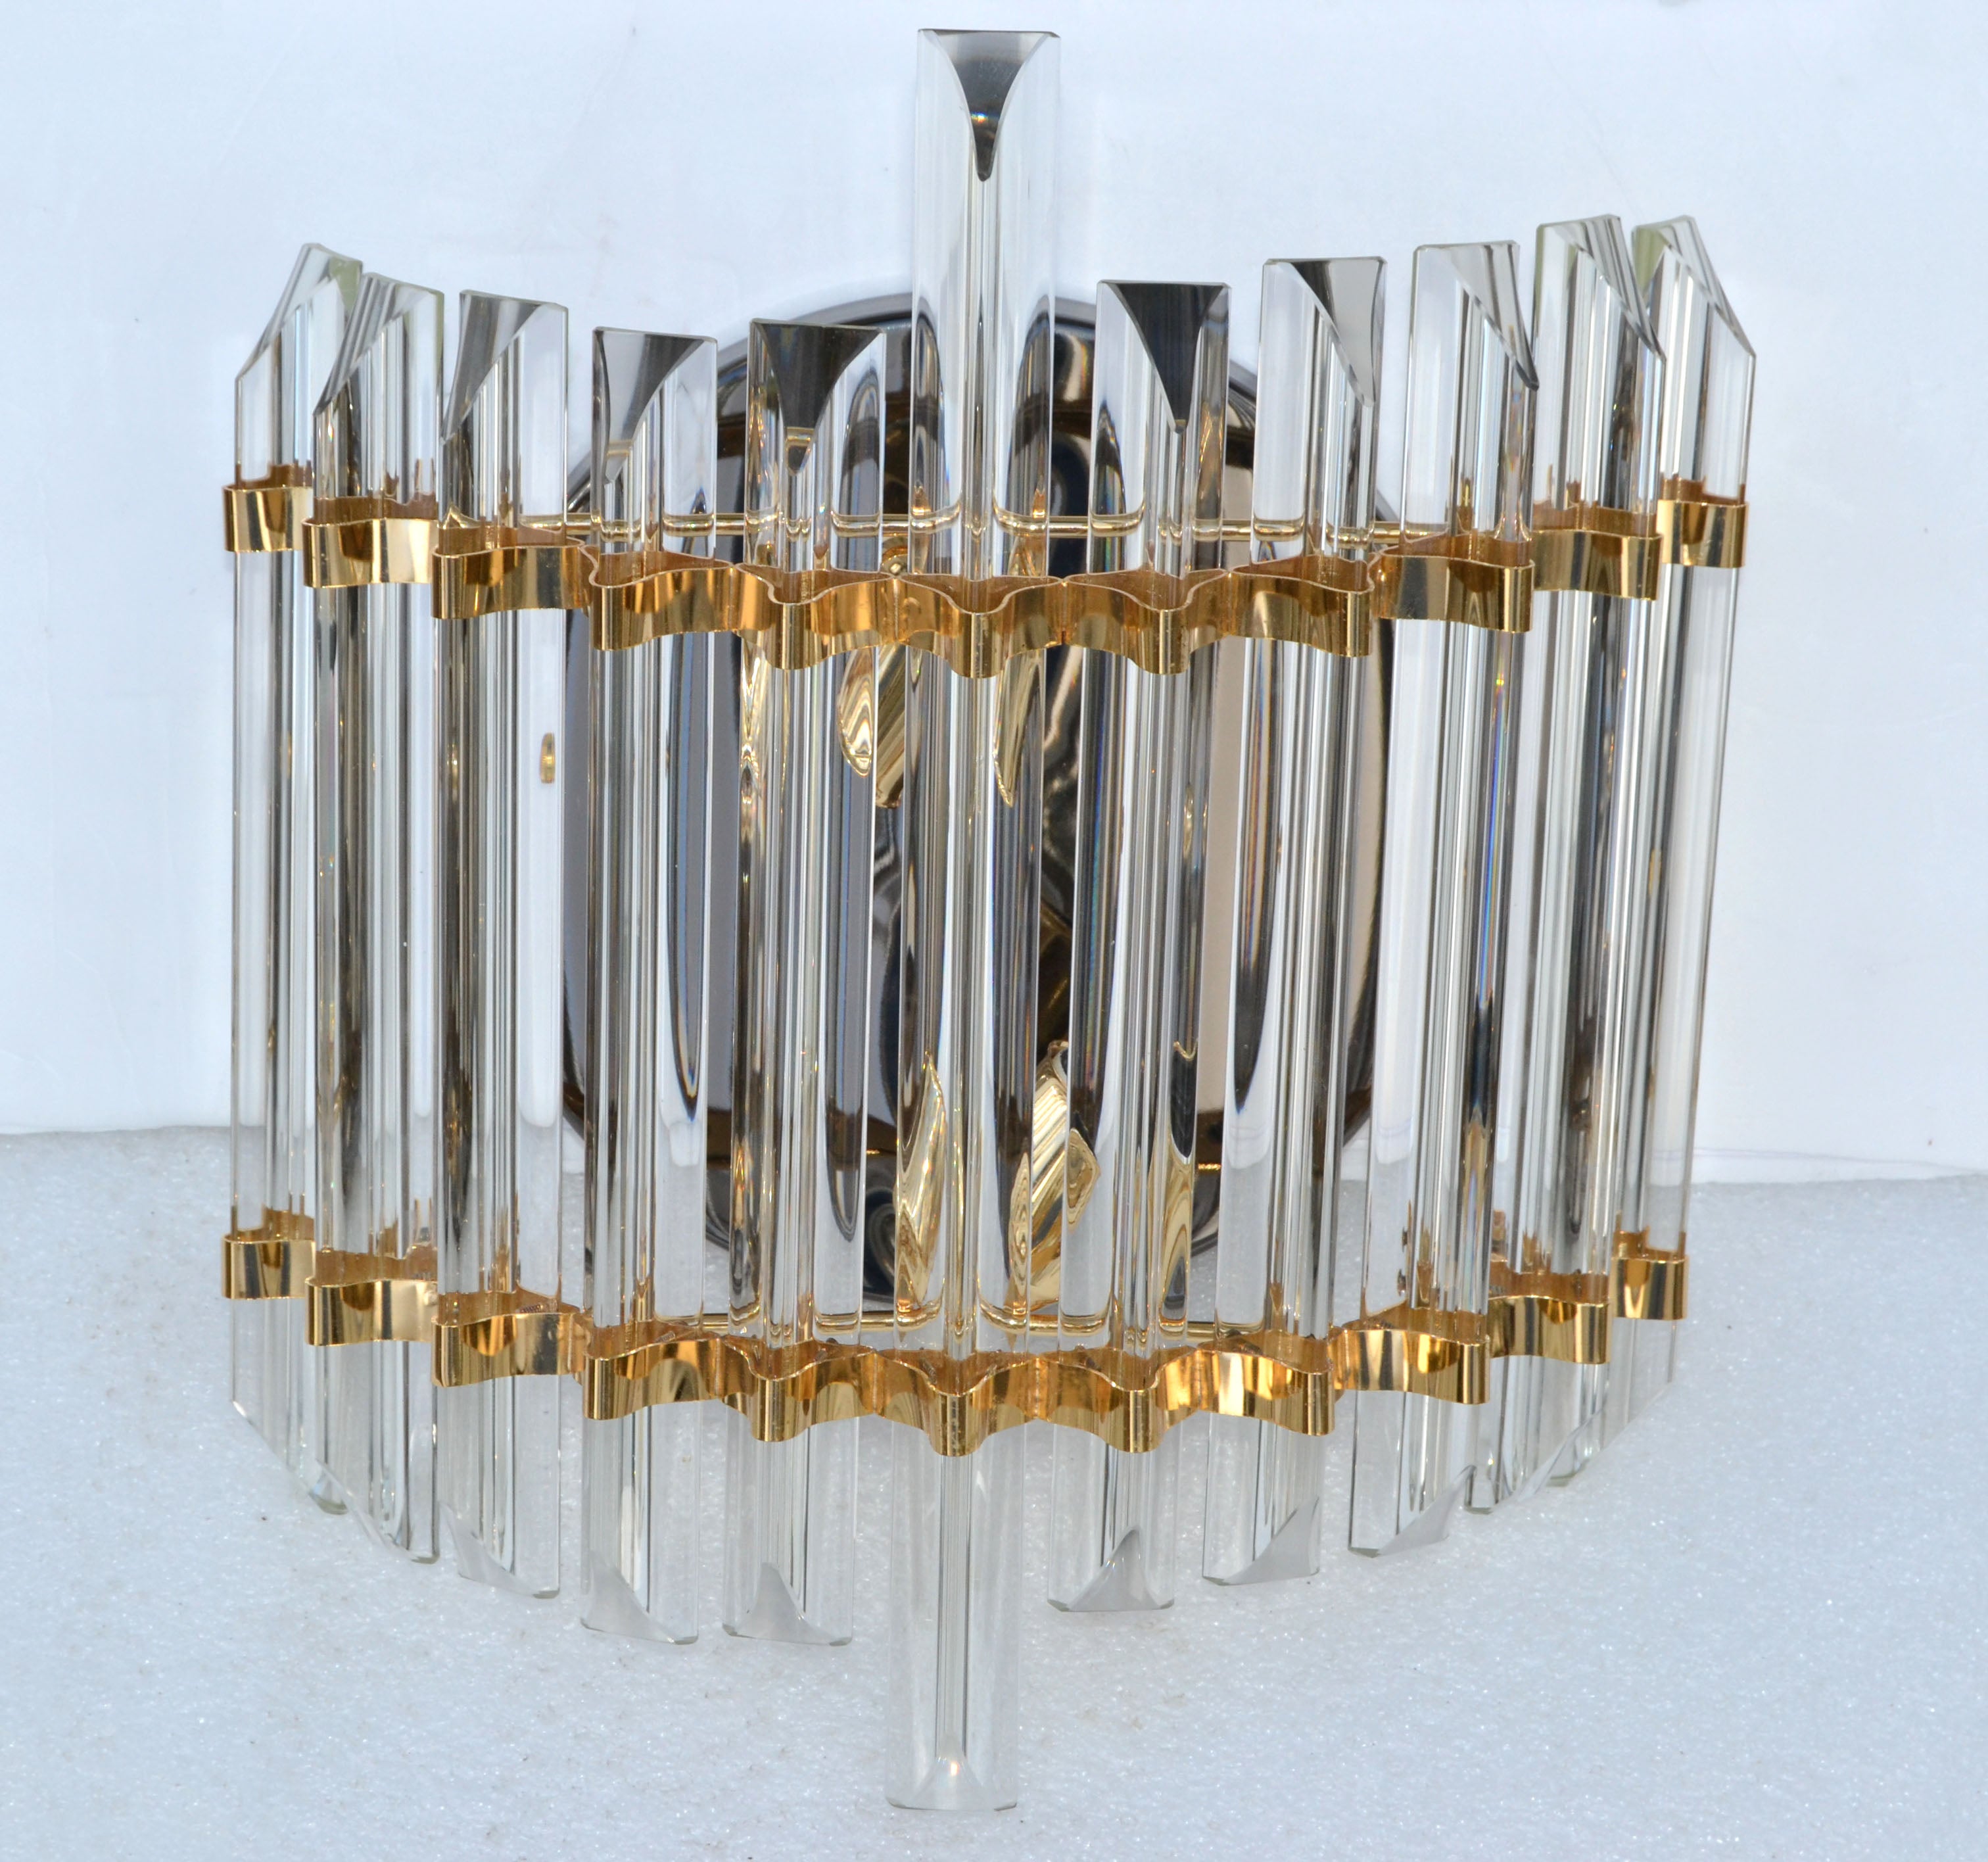 Italian Venini style glass sconce, 'Triedi' Glass rod, large Model, impressive. 
Has 2 socket, E27 base, 60 watt max per bulb.
In working condition. Round Black Plate measures: 9.75 inches diameter.
Projects a beautiful light through the glass